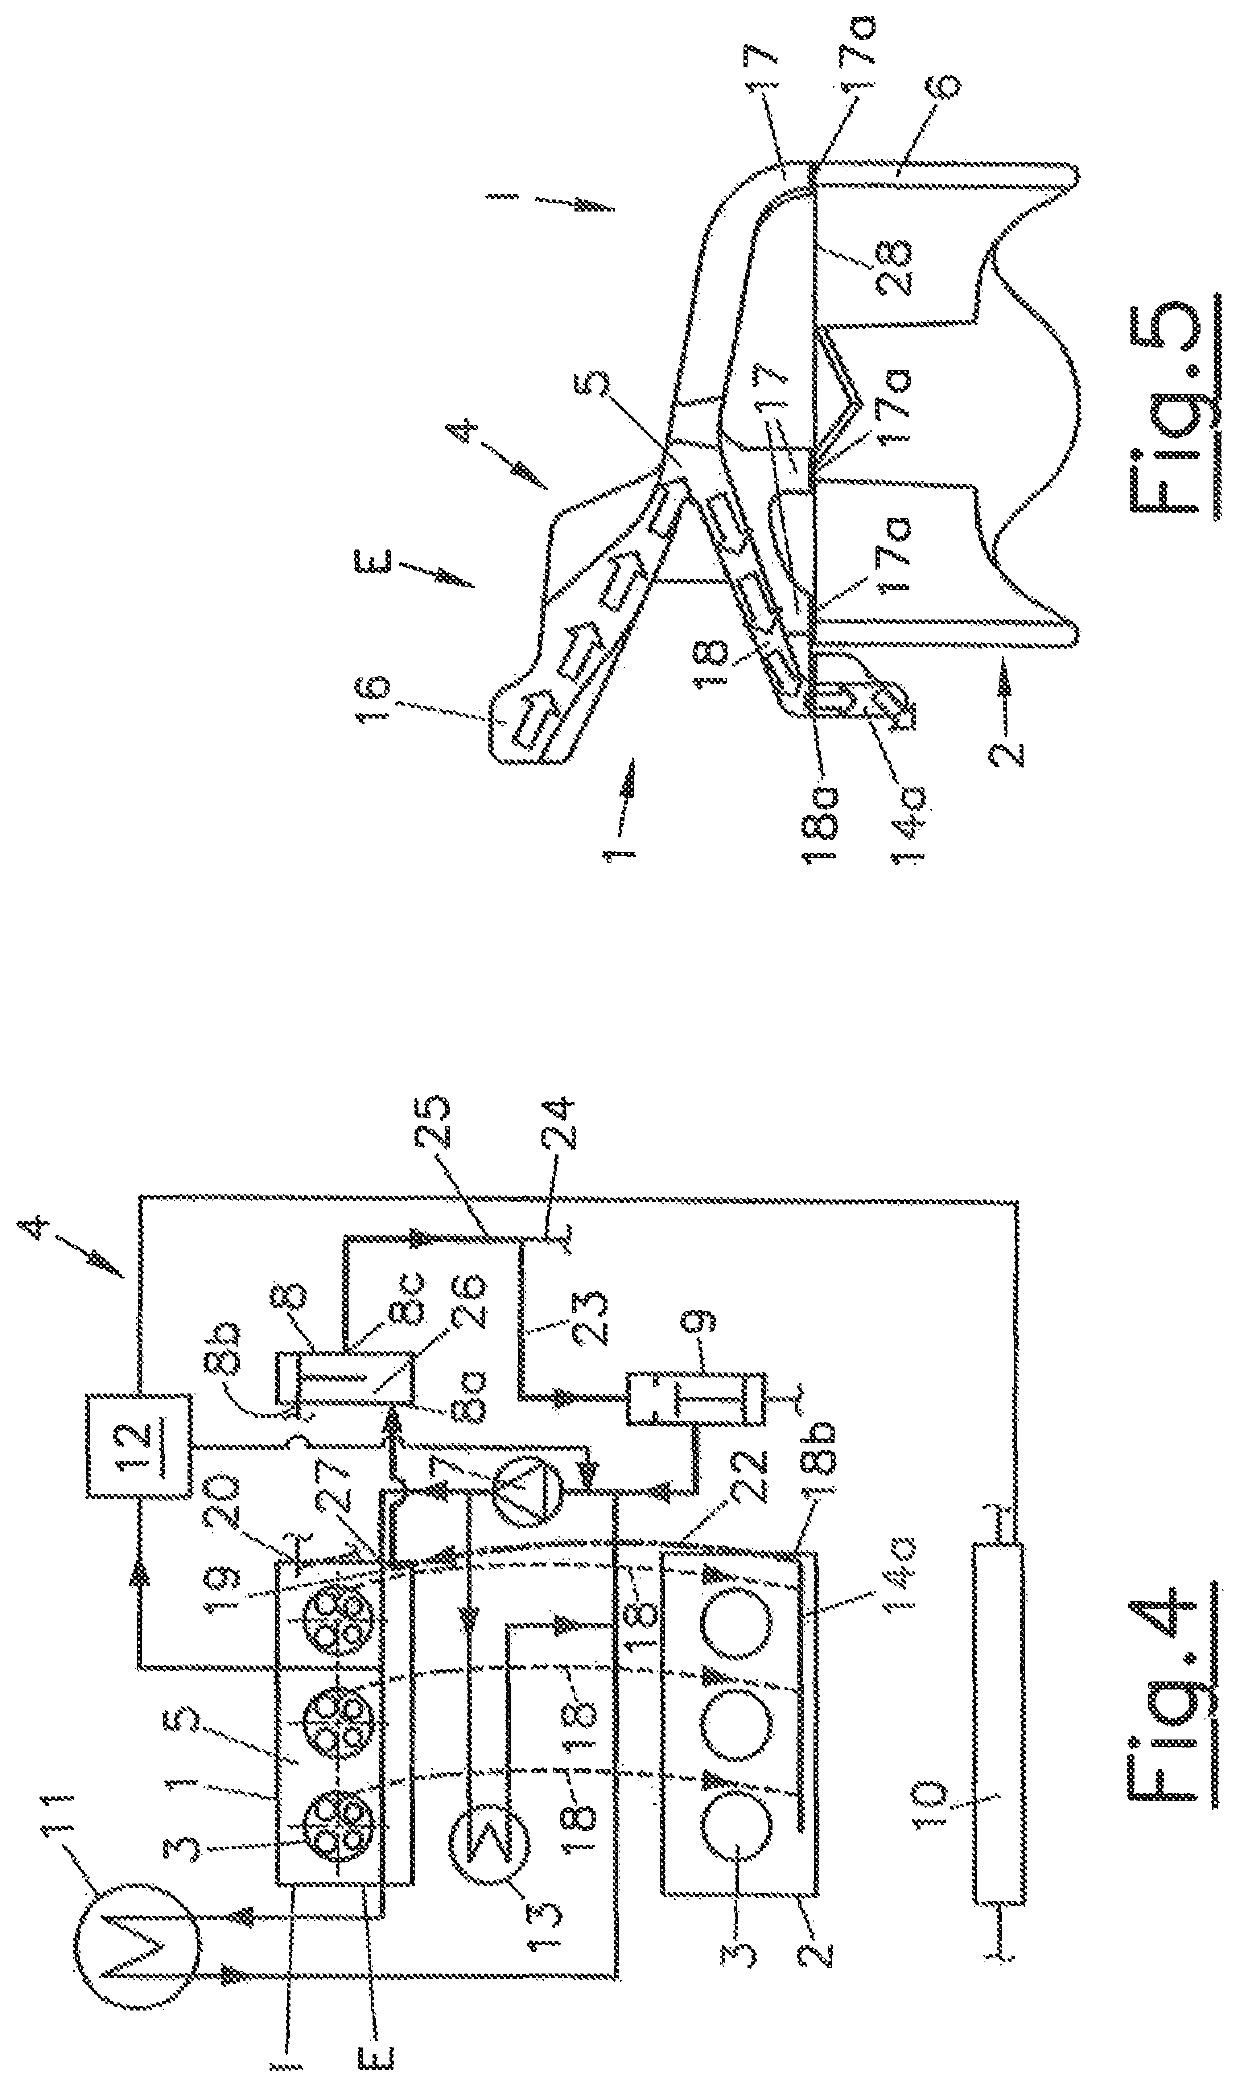 Cooling system for an internal combustion engine